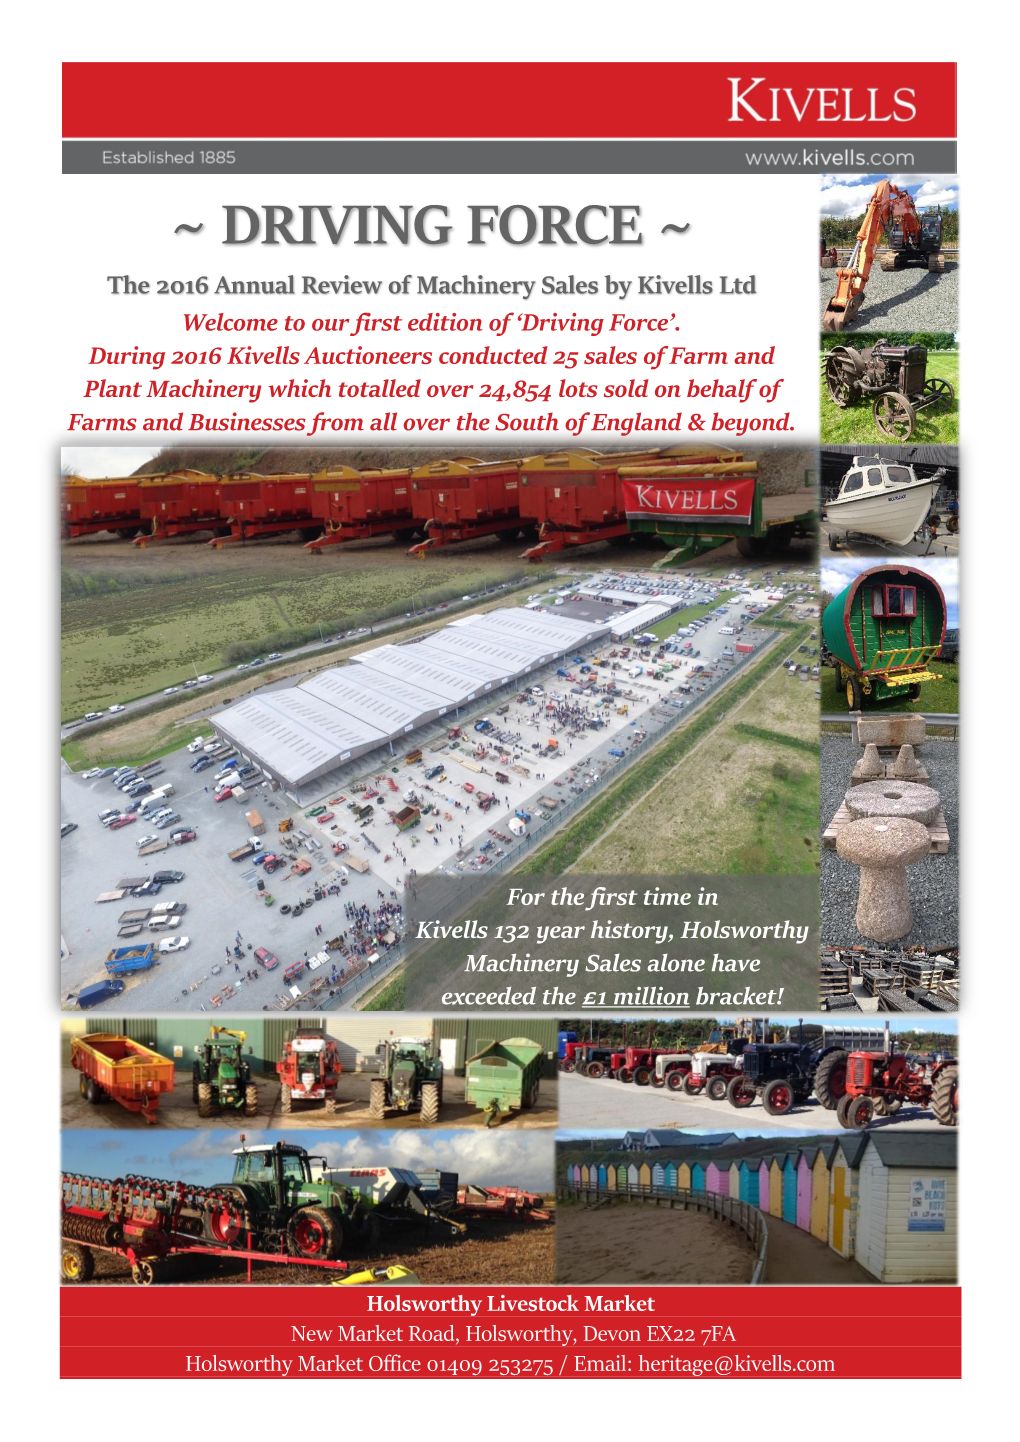 DRIVING FORCE ~ the 2016 Annual Review of Machinery Sales by Kivells Ltd Welcome to Our First Edition of ‘Driving Force’